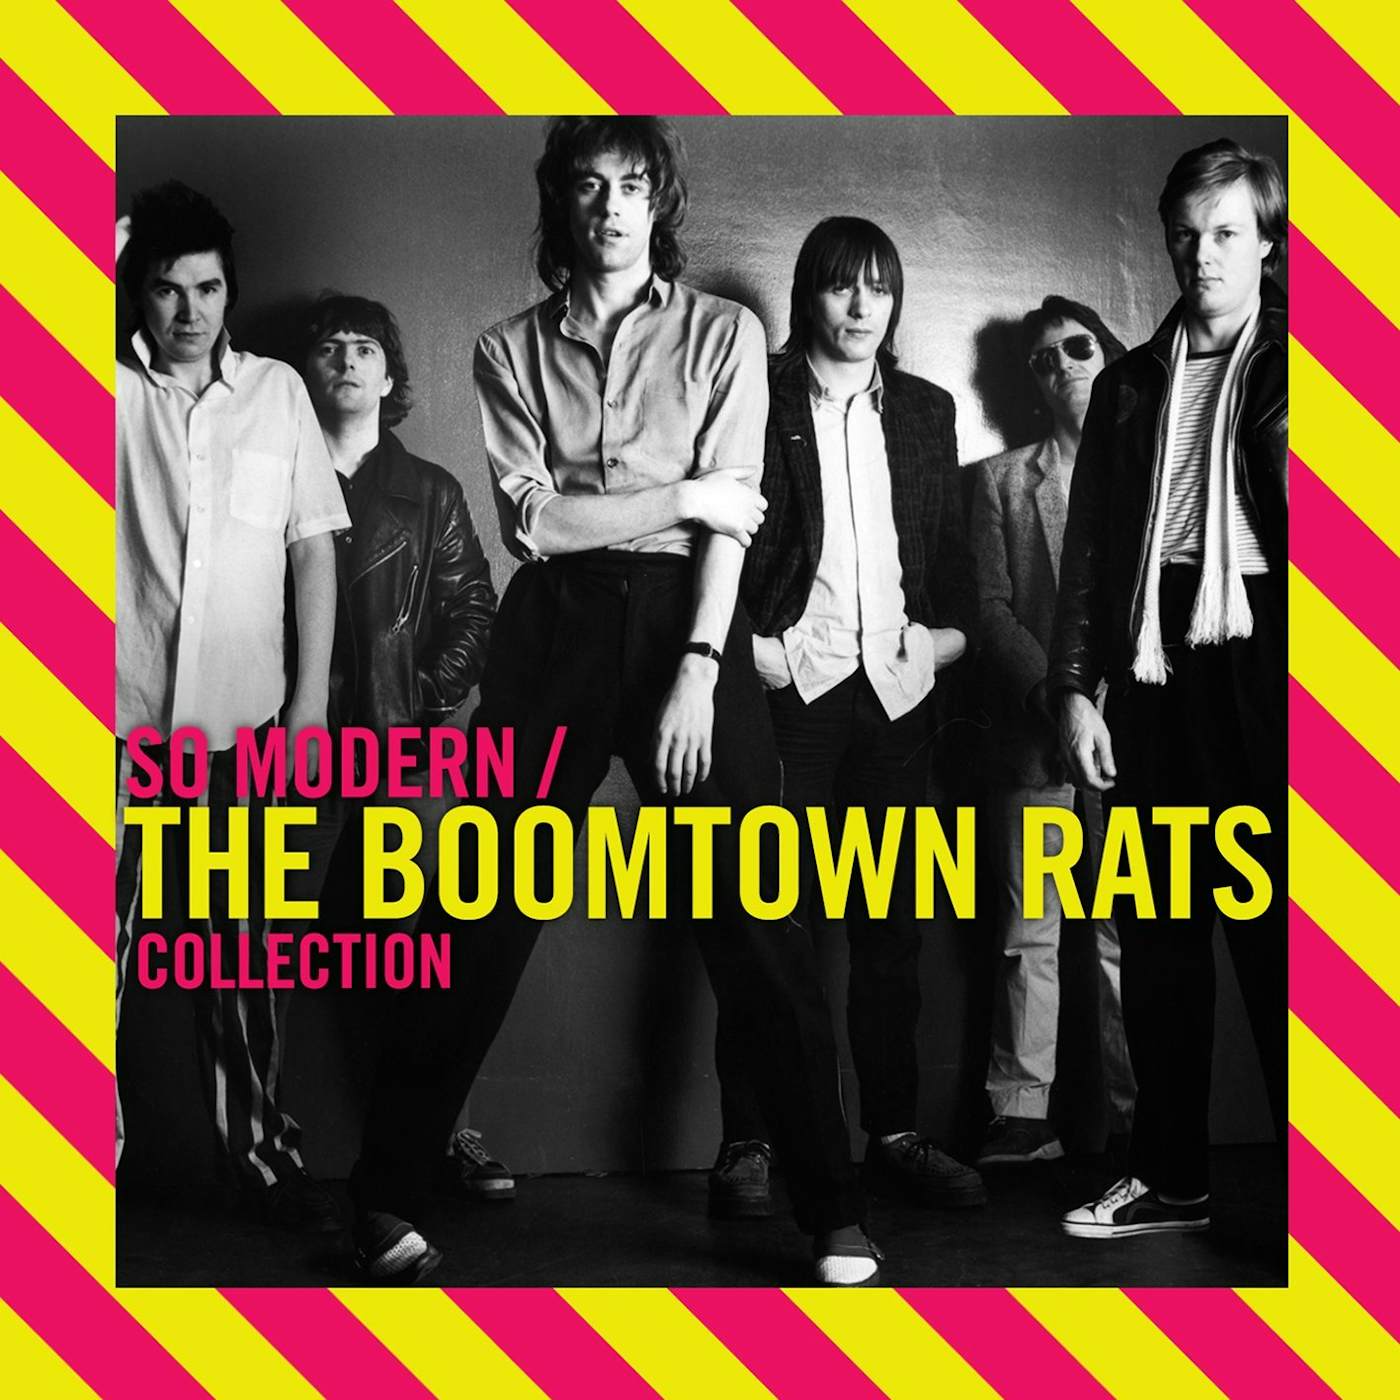 The Boomtown Rats SO MODERN: THE COLLECTION CD